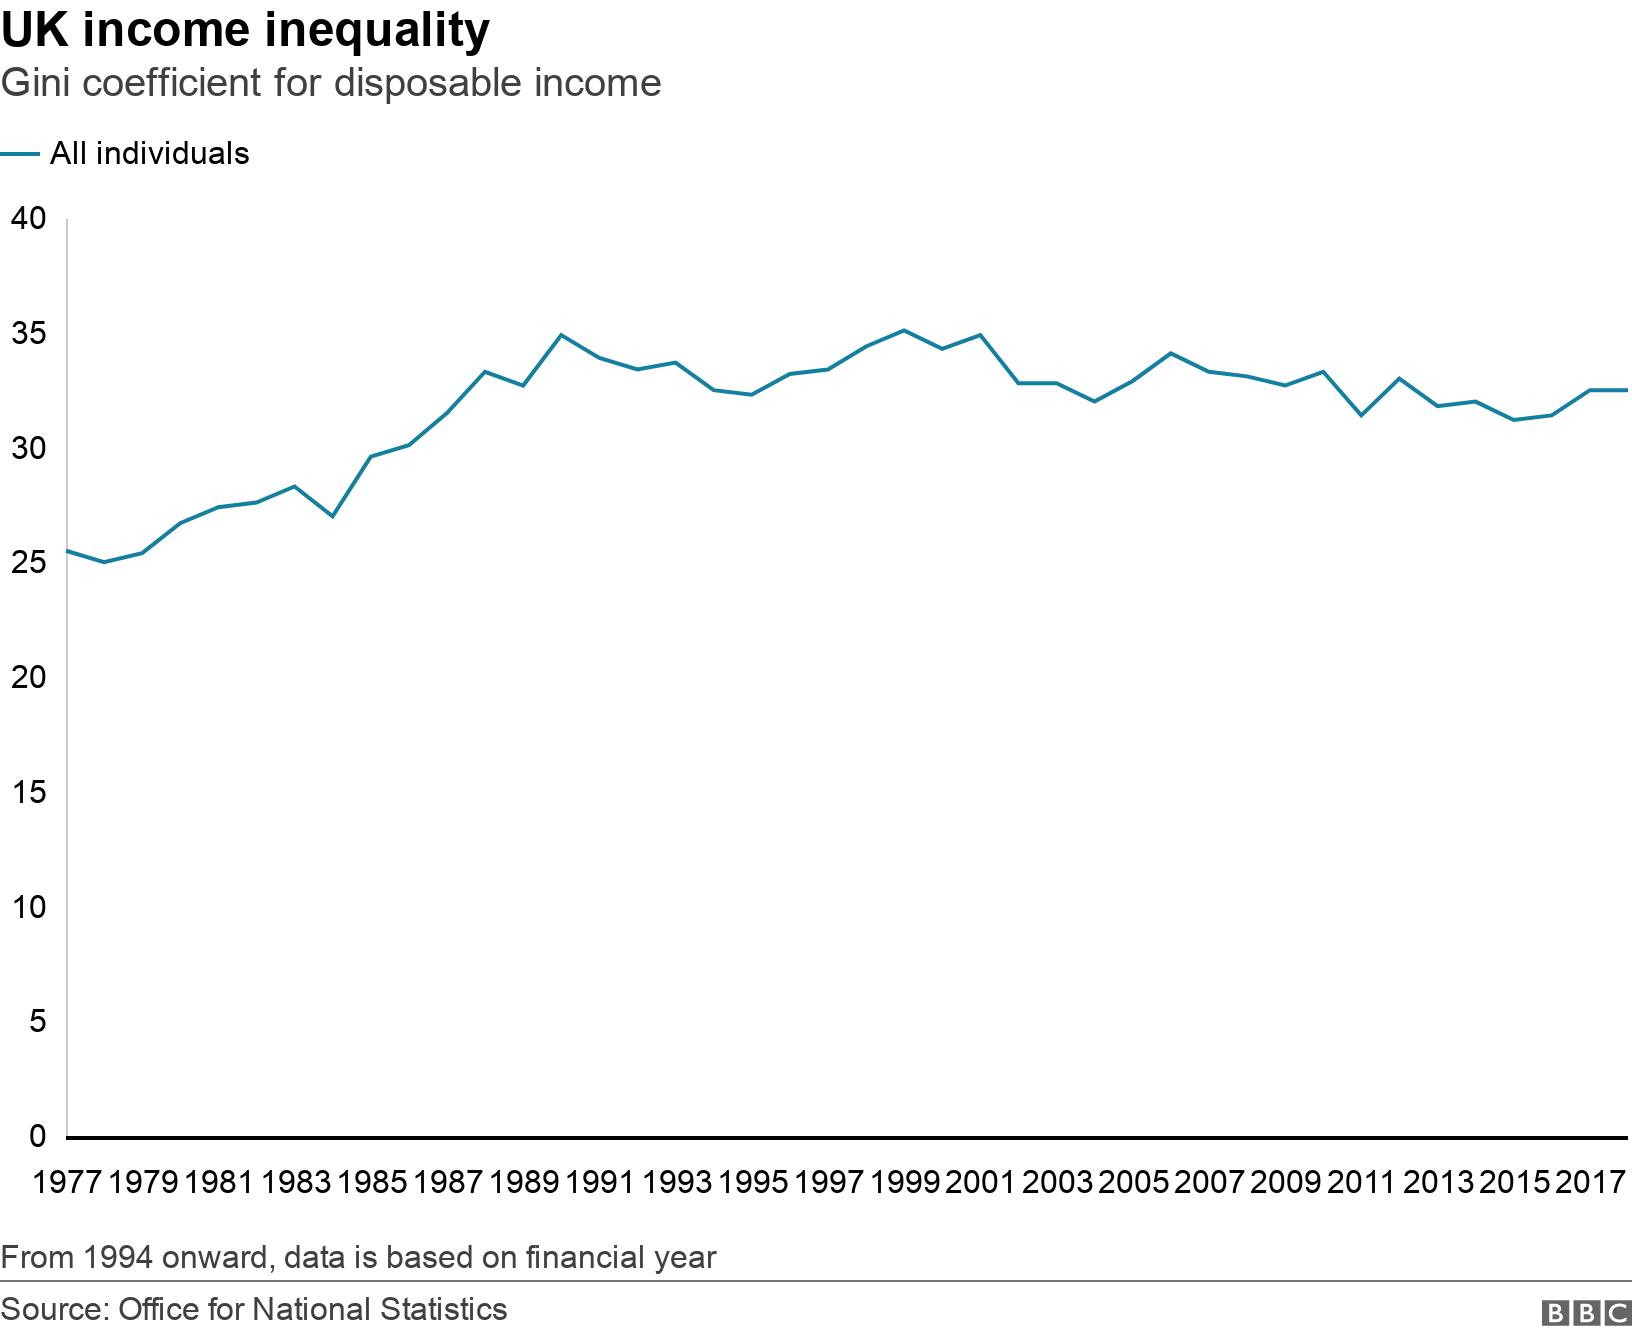 UK income inequality. Gini coefficient for disposable income. From 1994 onward, data is based on financial year.